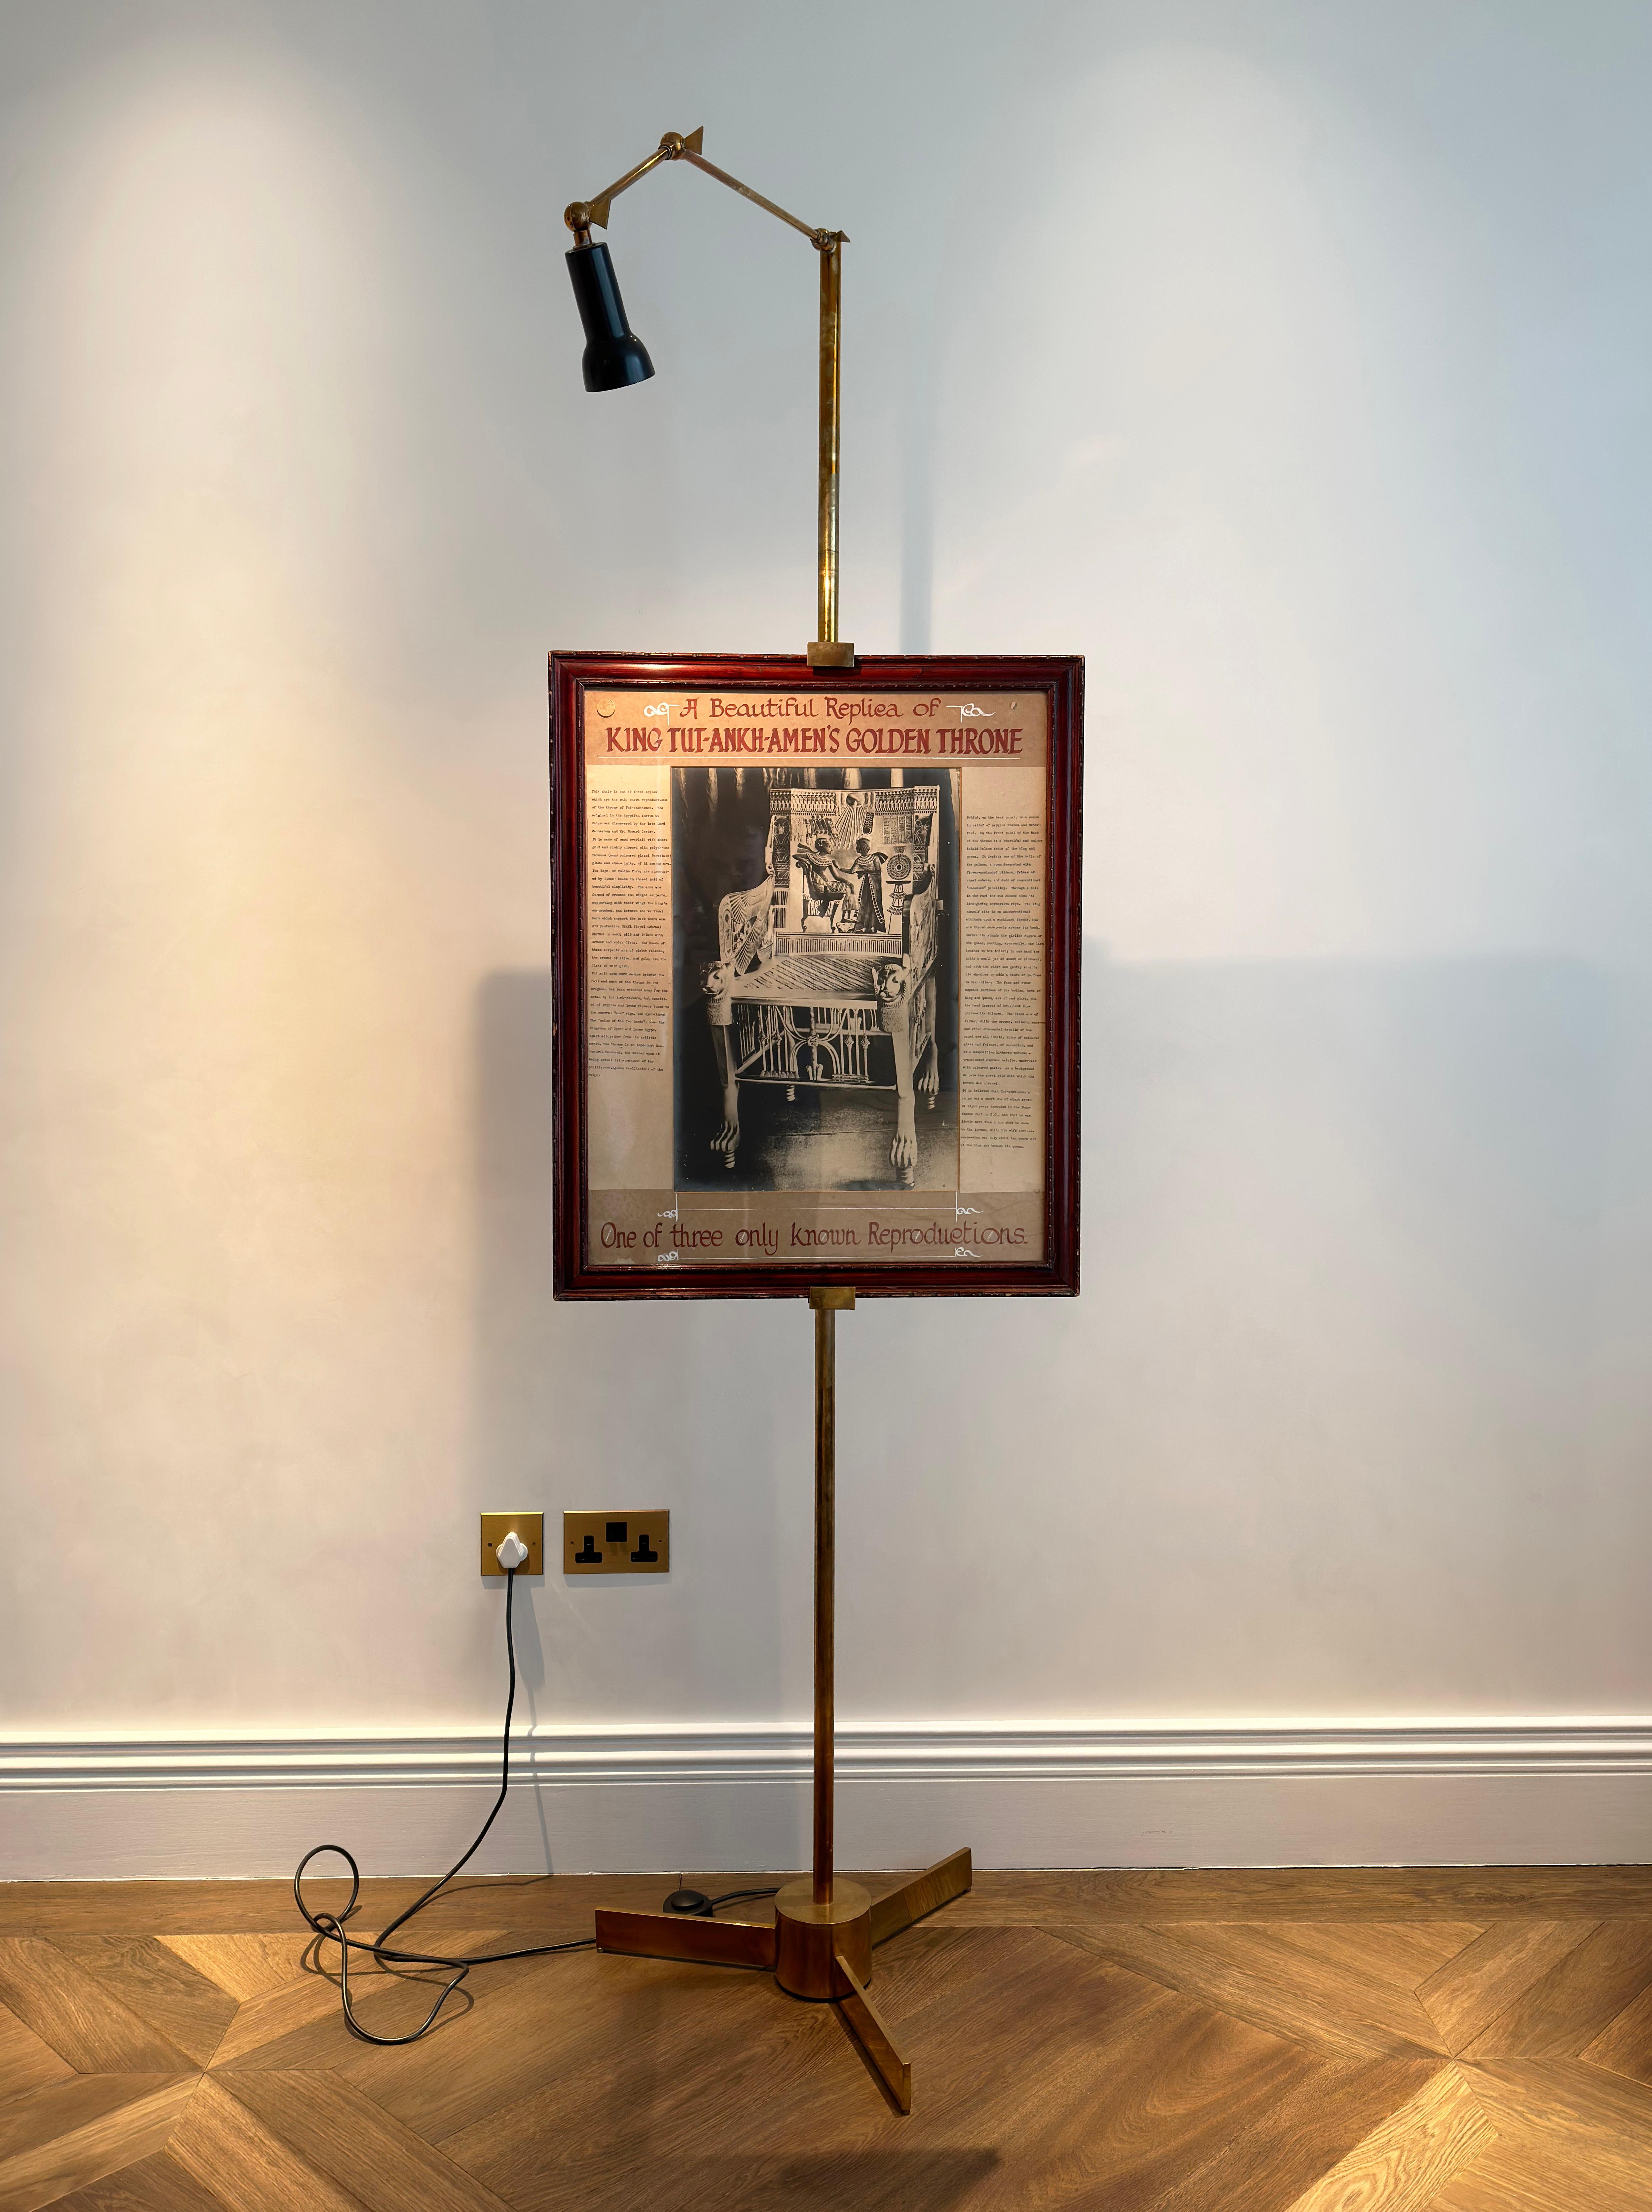 Introducing this brass easel lamp, a testament to mid-century Italian design ingenuity. Crafted around the late 1950s, this tall brass floor lamp stands as an homage to Angelo Lelli's iconic easel lamp for Arredoluce. Its polished brass silhouette